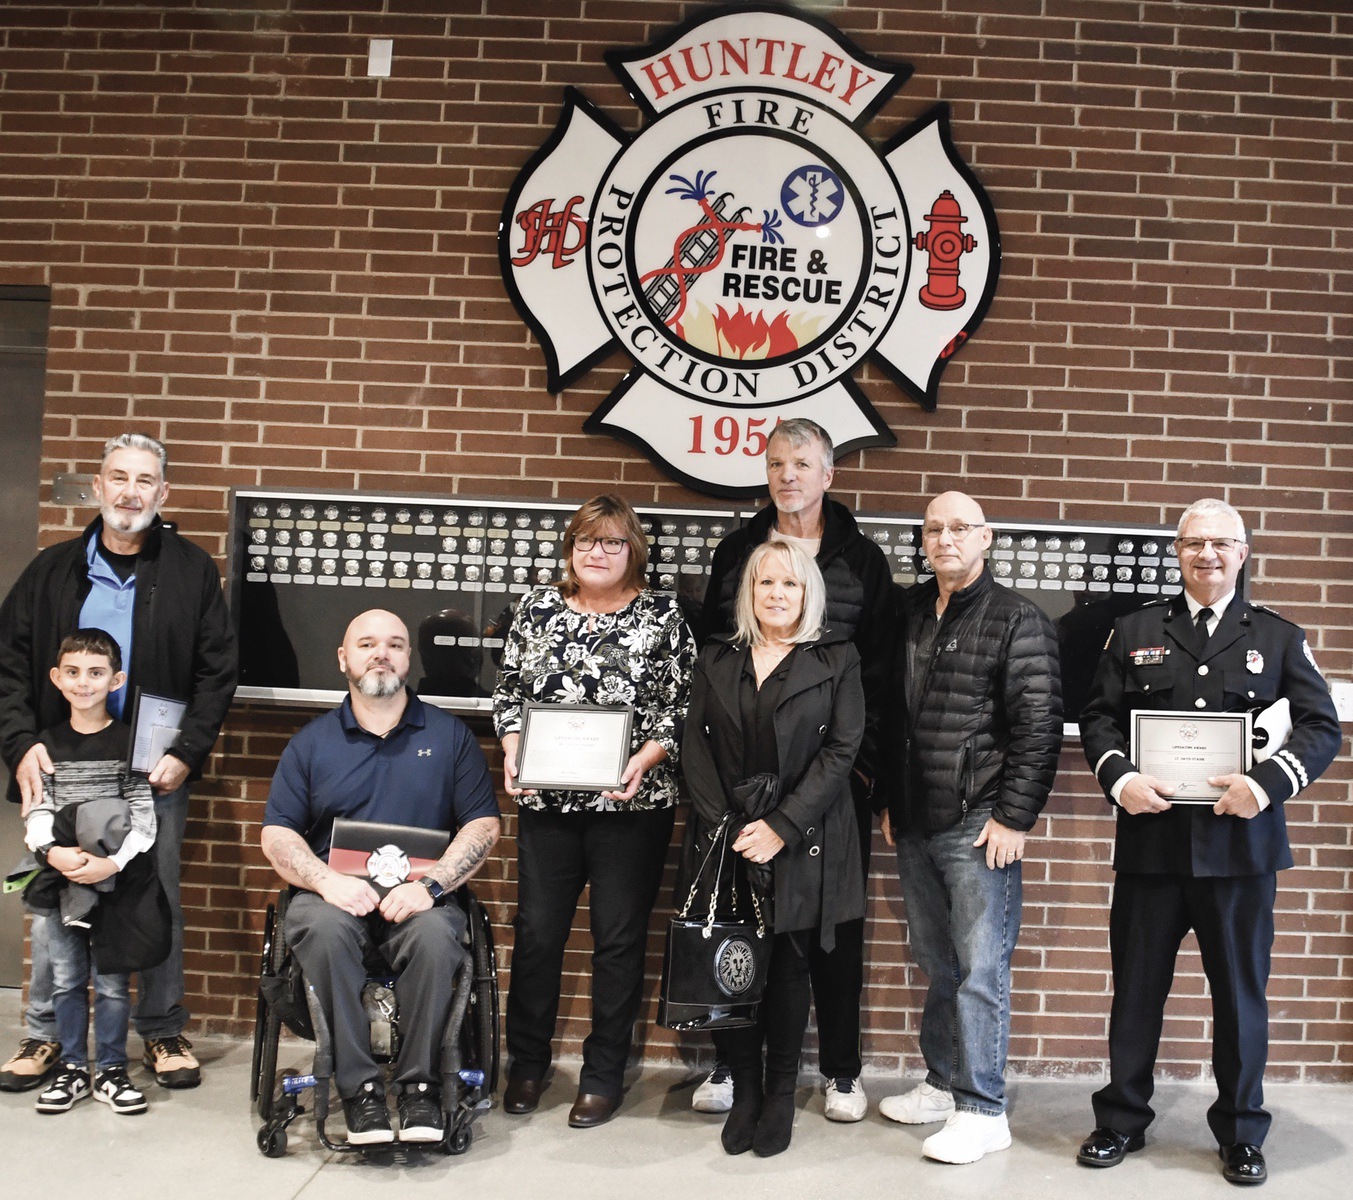 Award recipients and guests at the lifeSaving ceremony for the actions taken to save Sun City softball player Dave Rodiek’s life, when he collapsed with cardiac arrest during a game. (Photo by Christine Such/My Sun Day News)